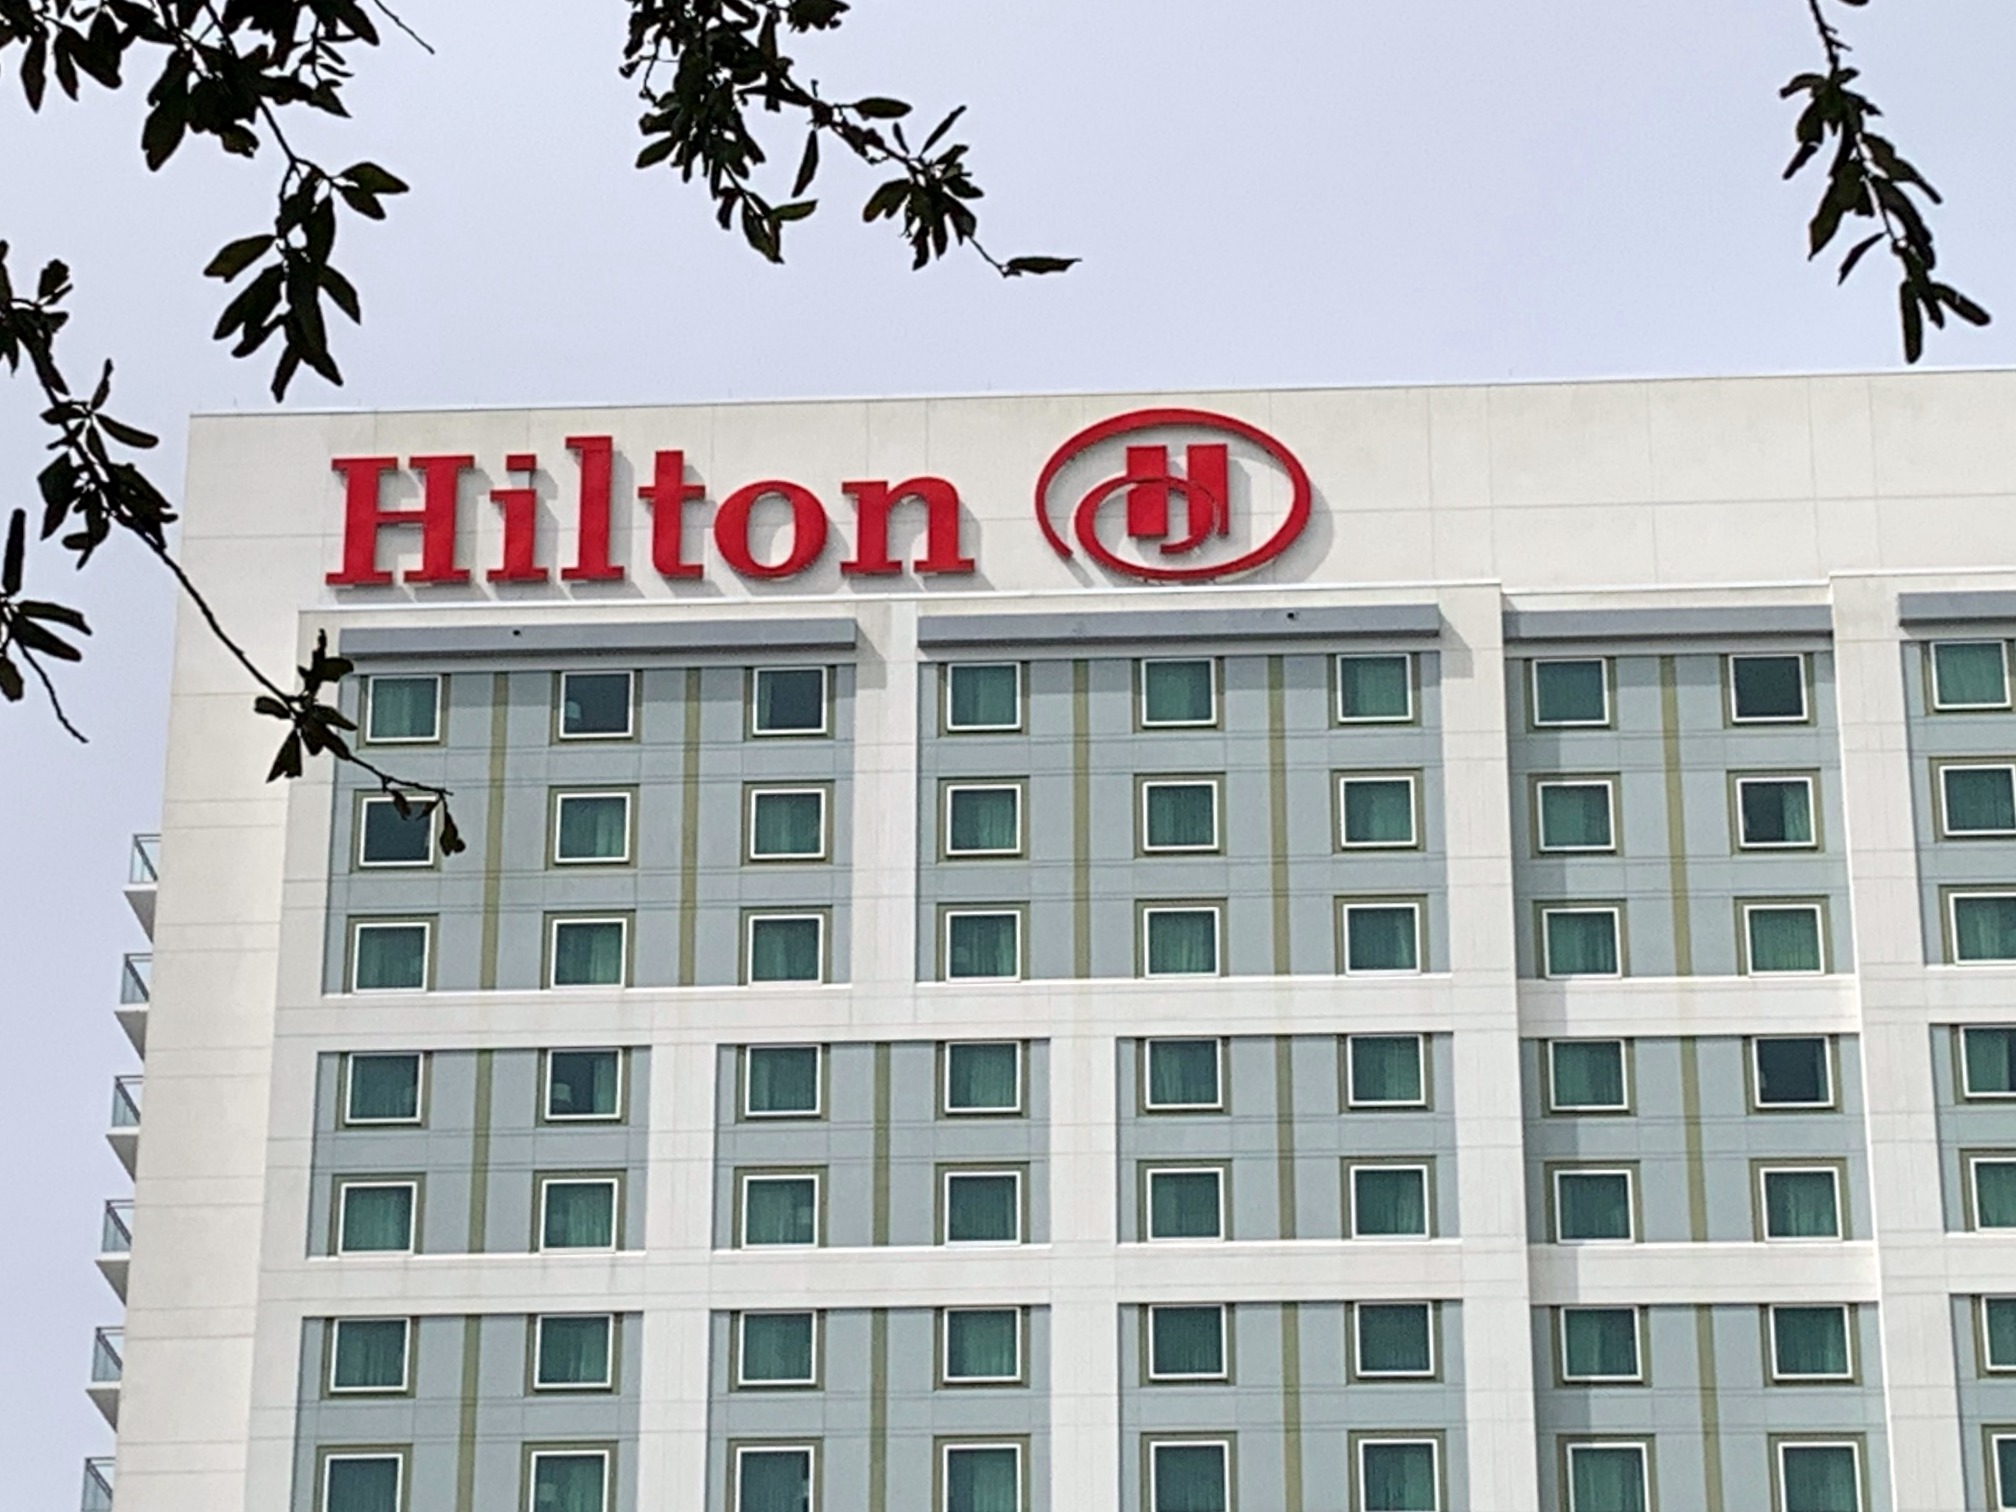 Hilton policies on free night award, elite status, and point expiration extensions due to COVID-19